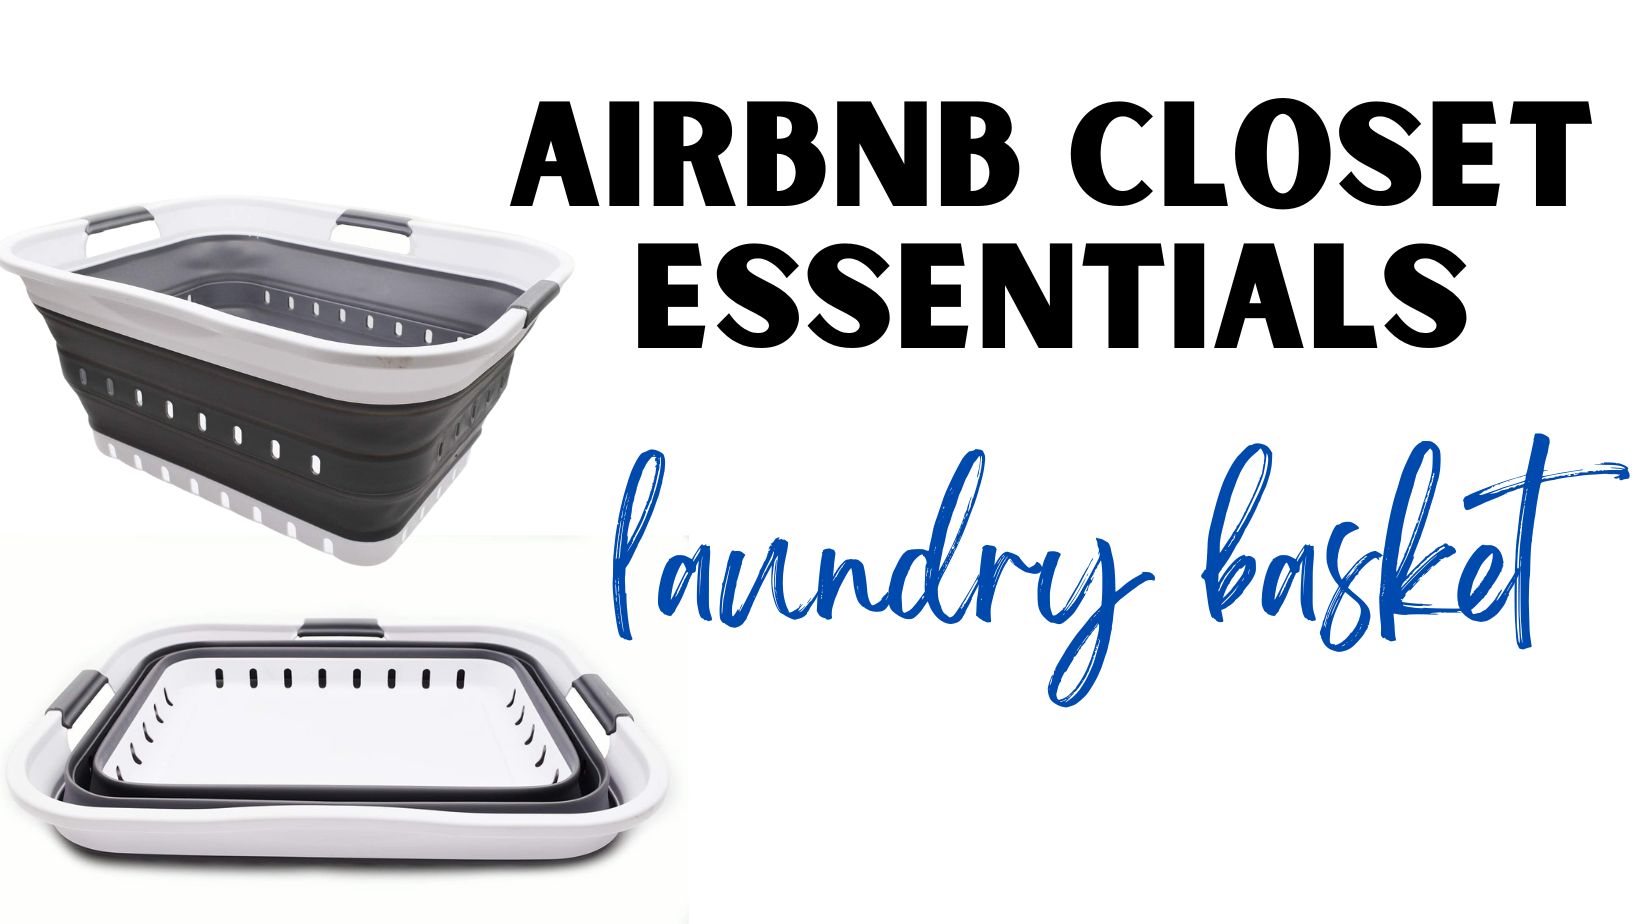 Airbnb Closet Collapsible Laundry Baskets